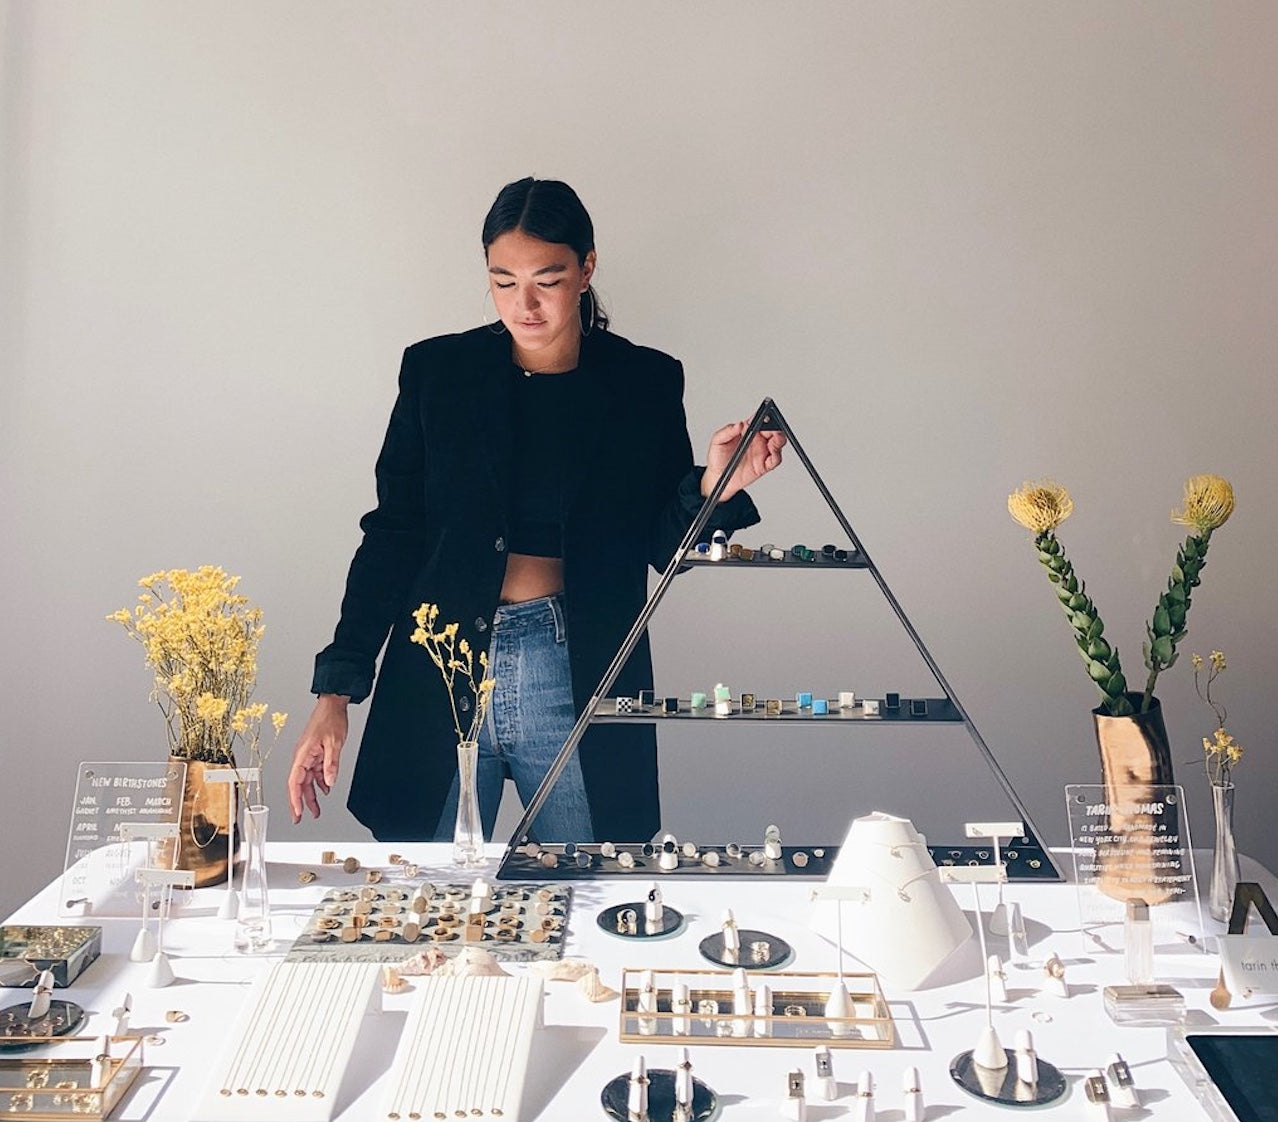 Artist Tarin Thomas standing behind a display table arranged with jewelry